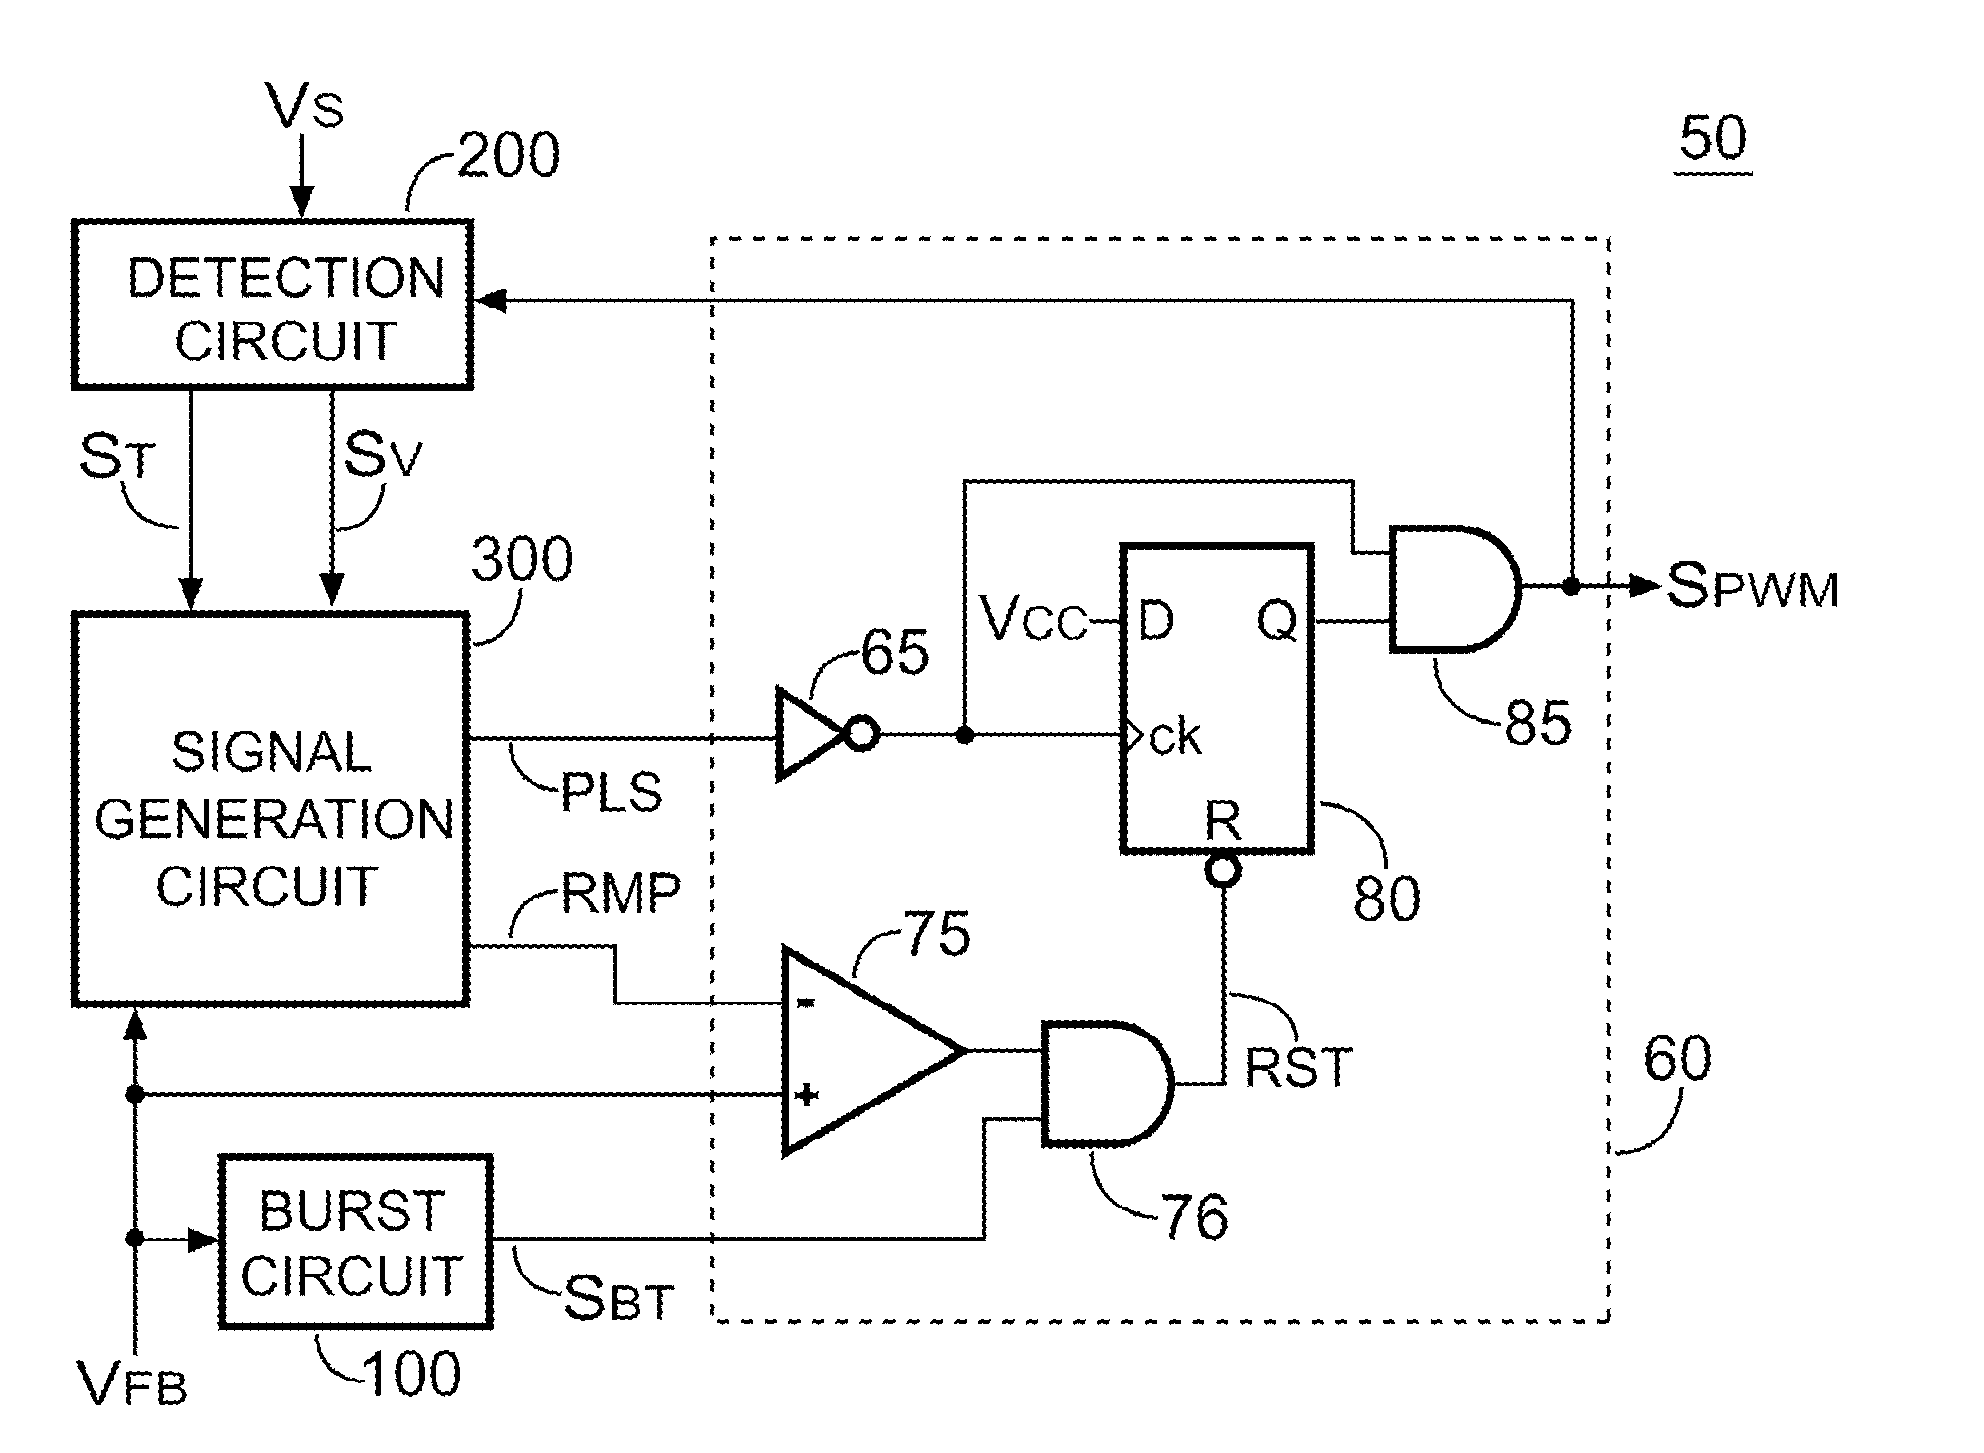 Controller with Valley Switching and Limited Maximum Frequency for Quasi-Resonant Power Converters